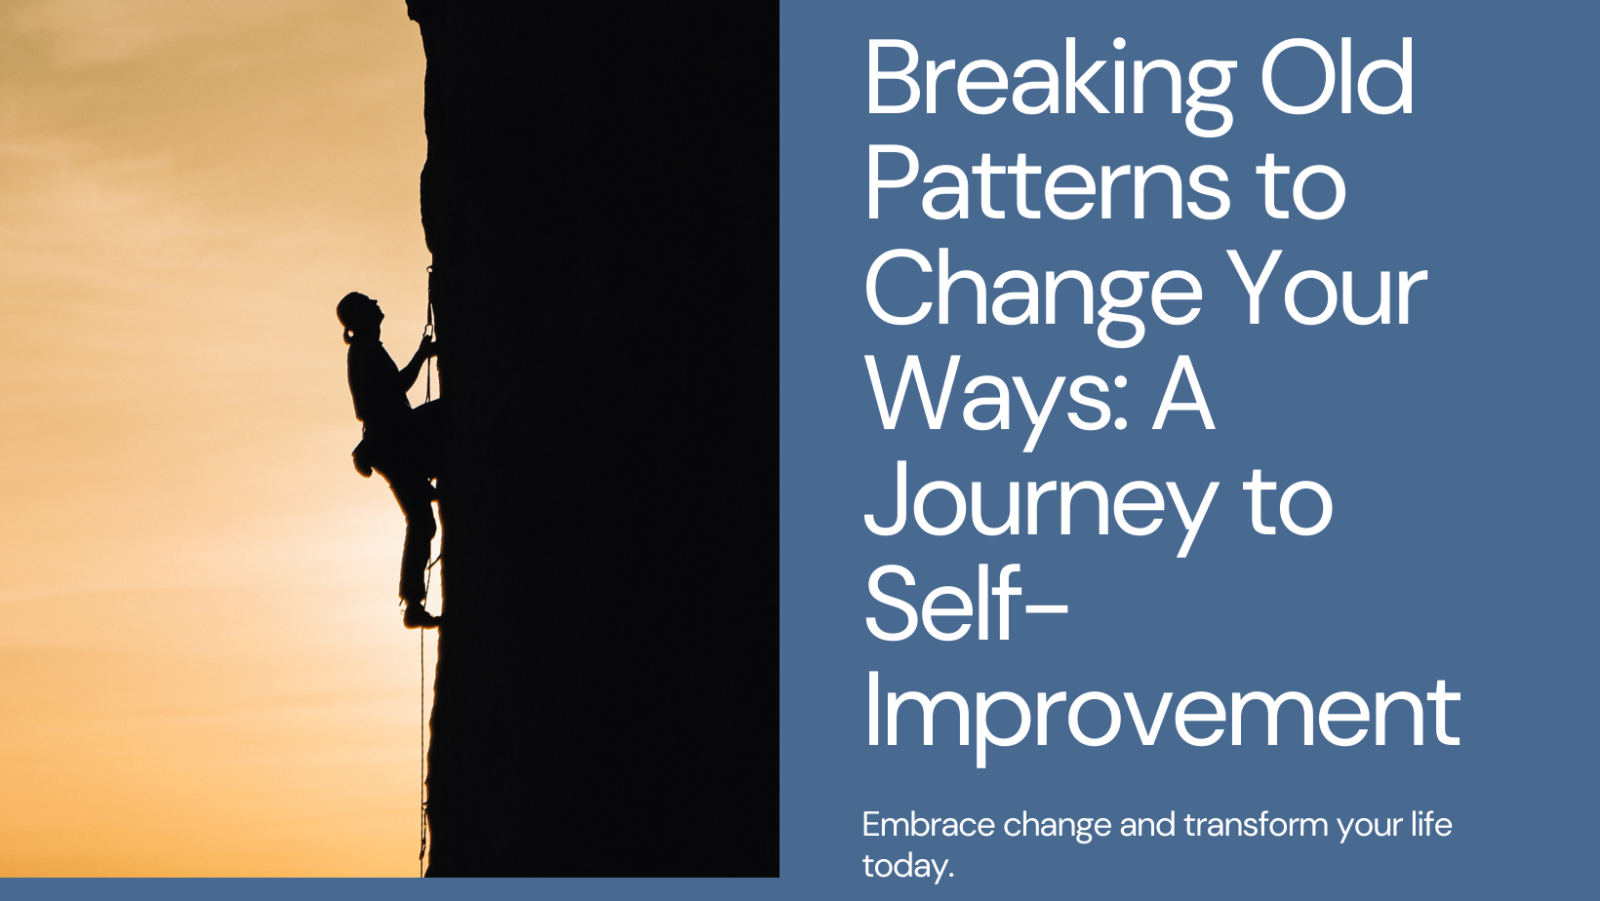 Breaking Old Patterns to Change Your Ways: A Journey to Self-Improvement